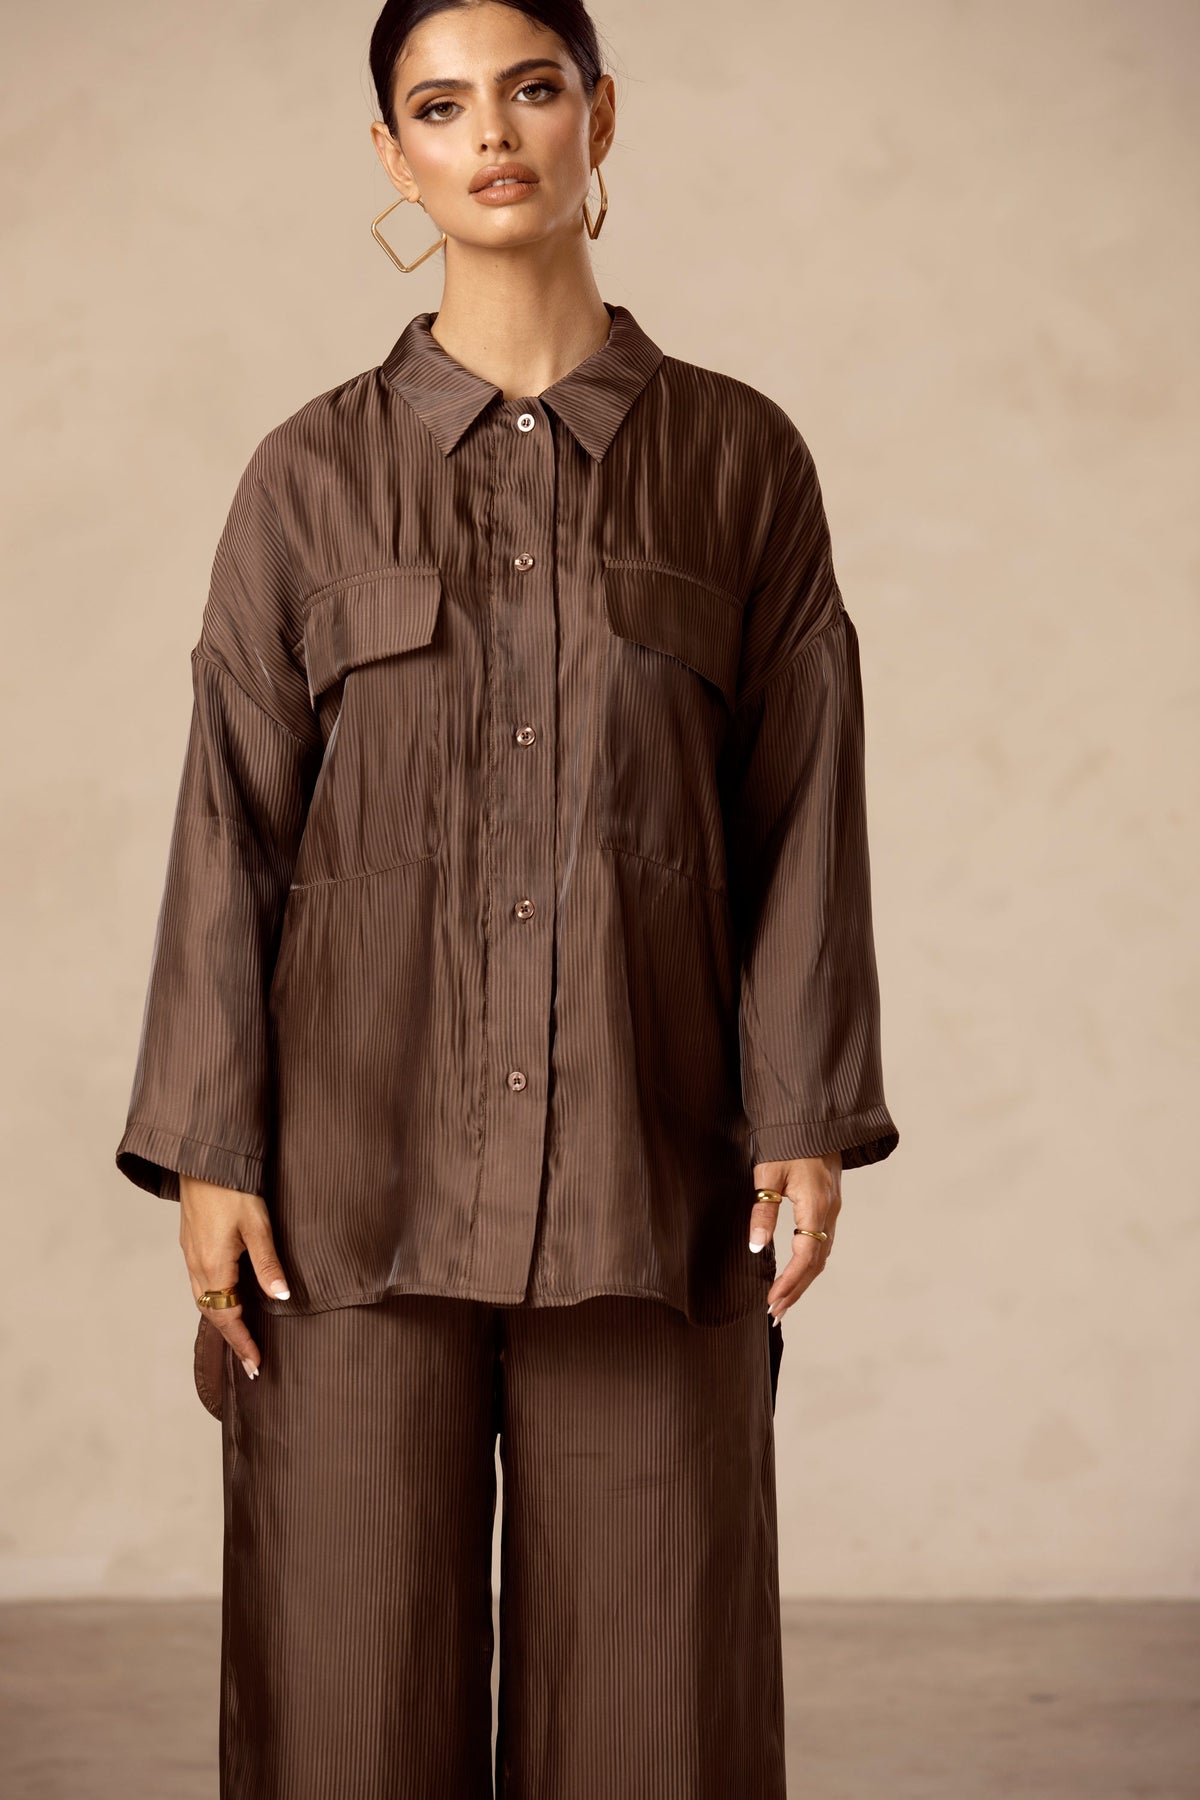 Chocolate Oversized Button Down Shirt epschoolboard 